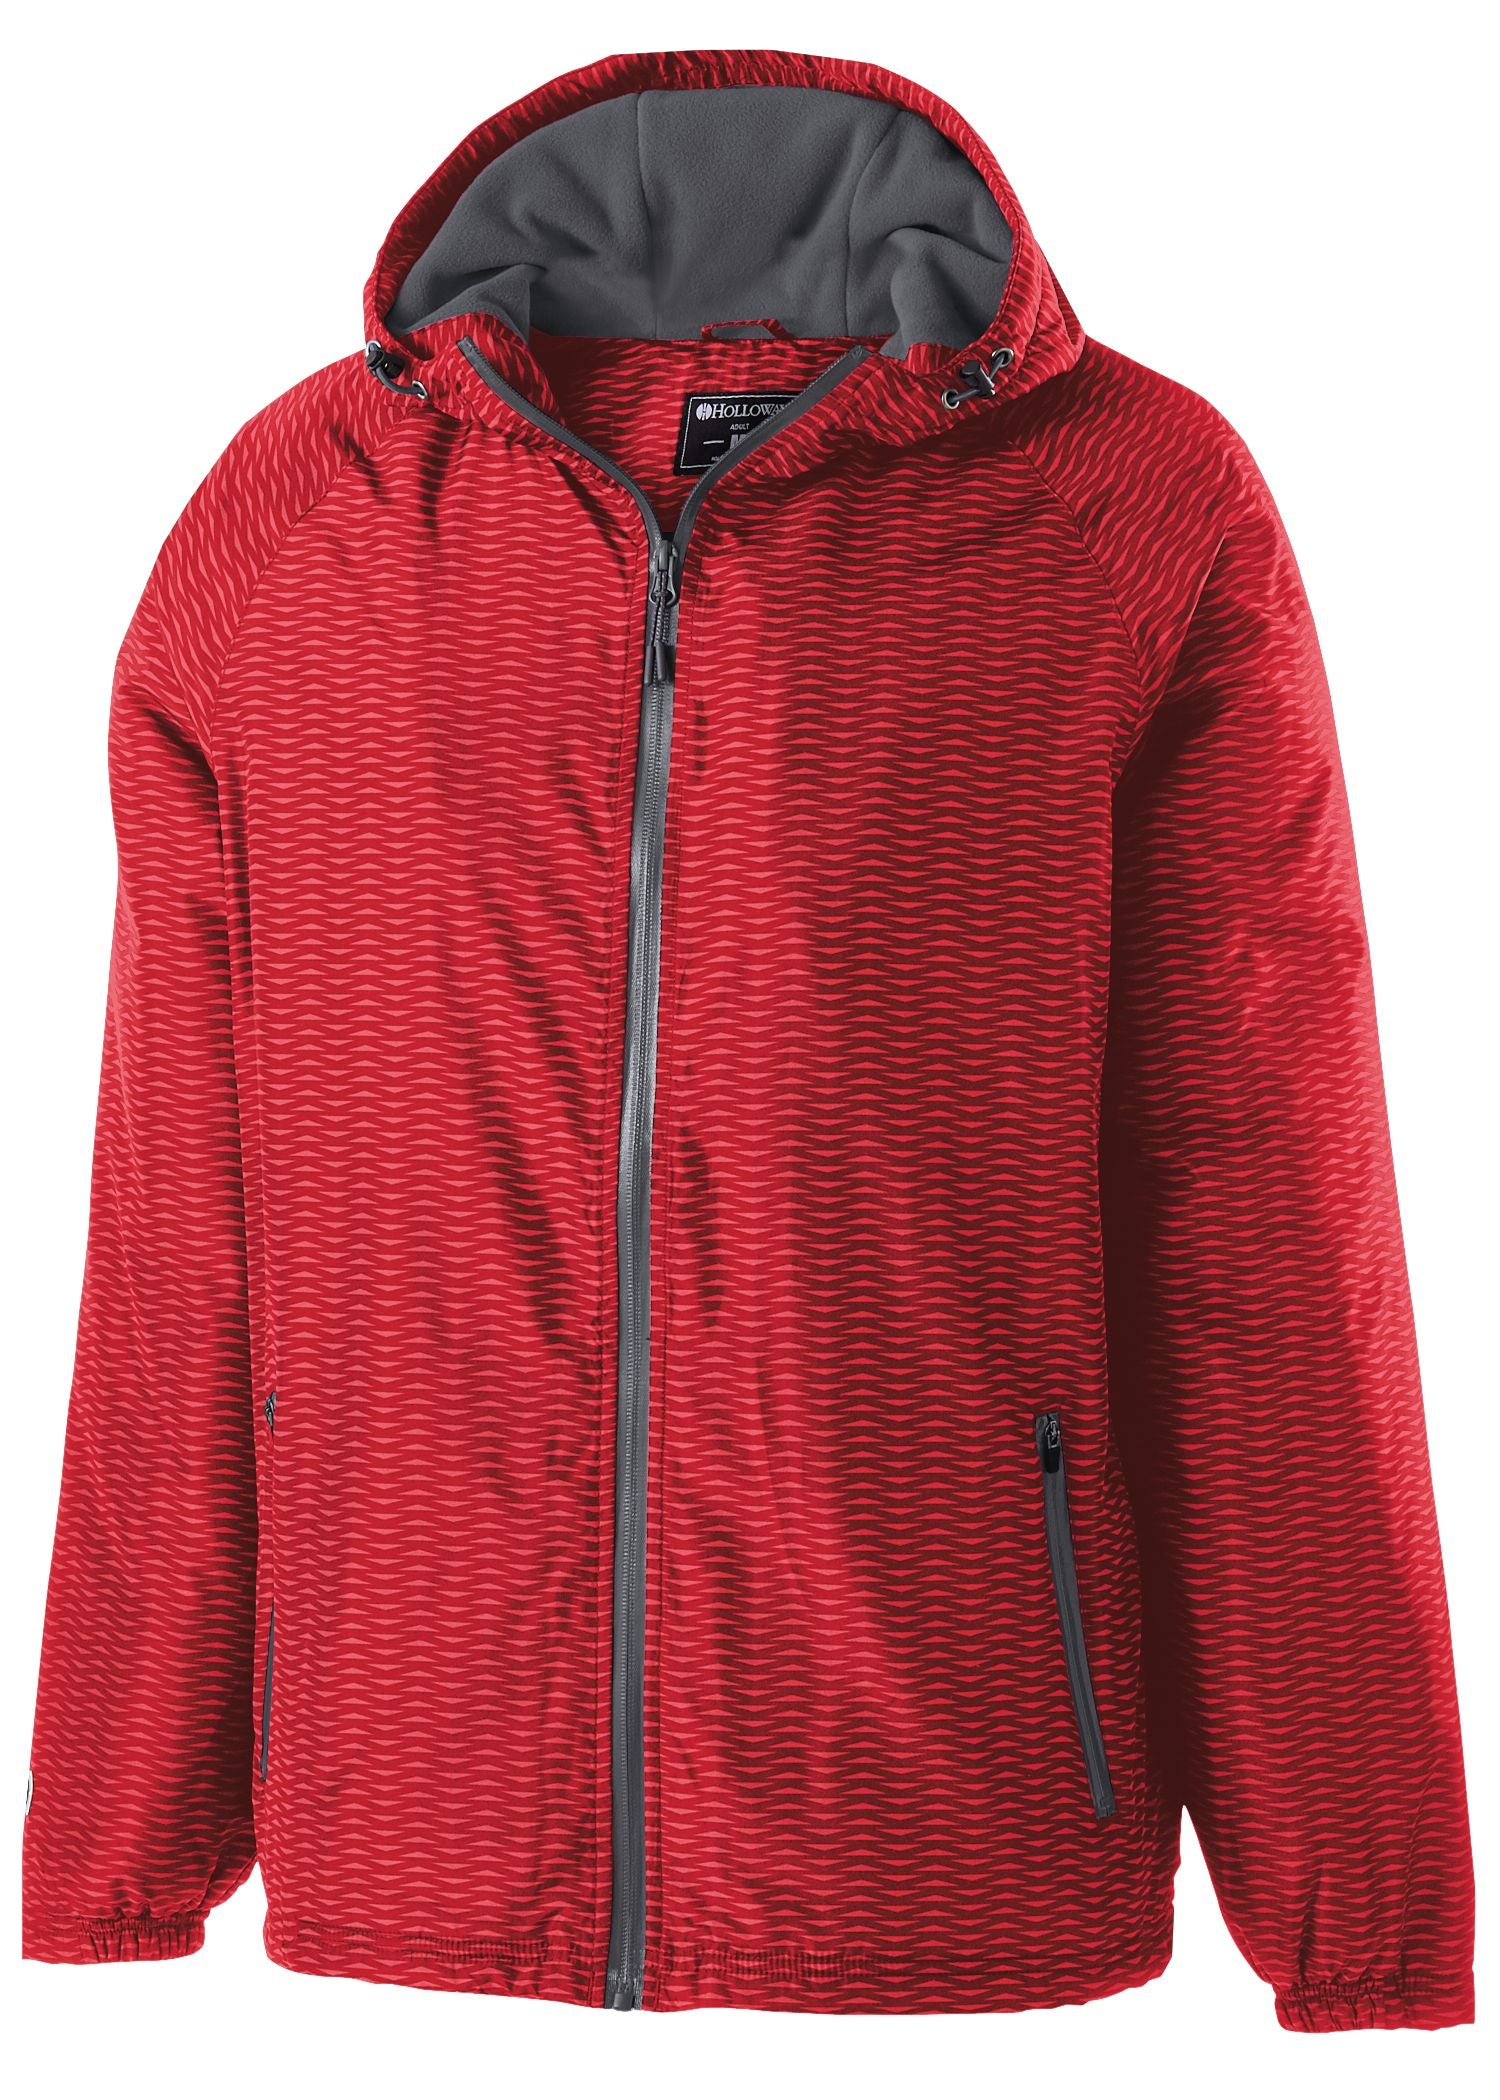 Holloway Range Jacket in Scarlet/Carbon  -Part of the Adult, Adult-Jacket, Holloway, Outerwear, Range-Collection product lines at KanaleyCreations.com